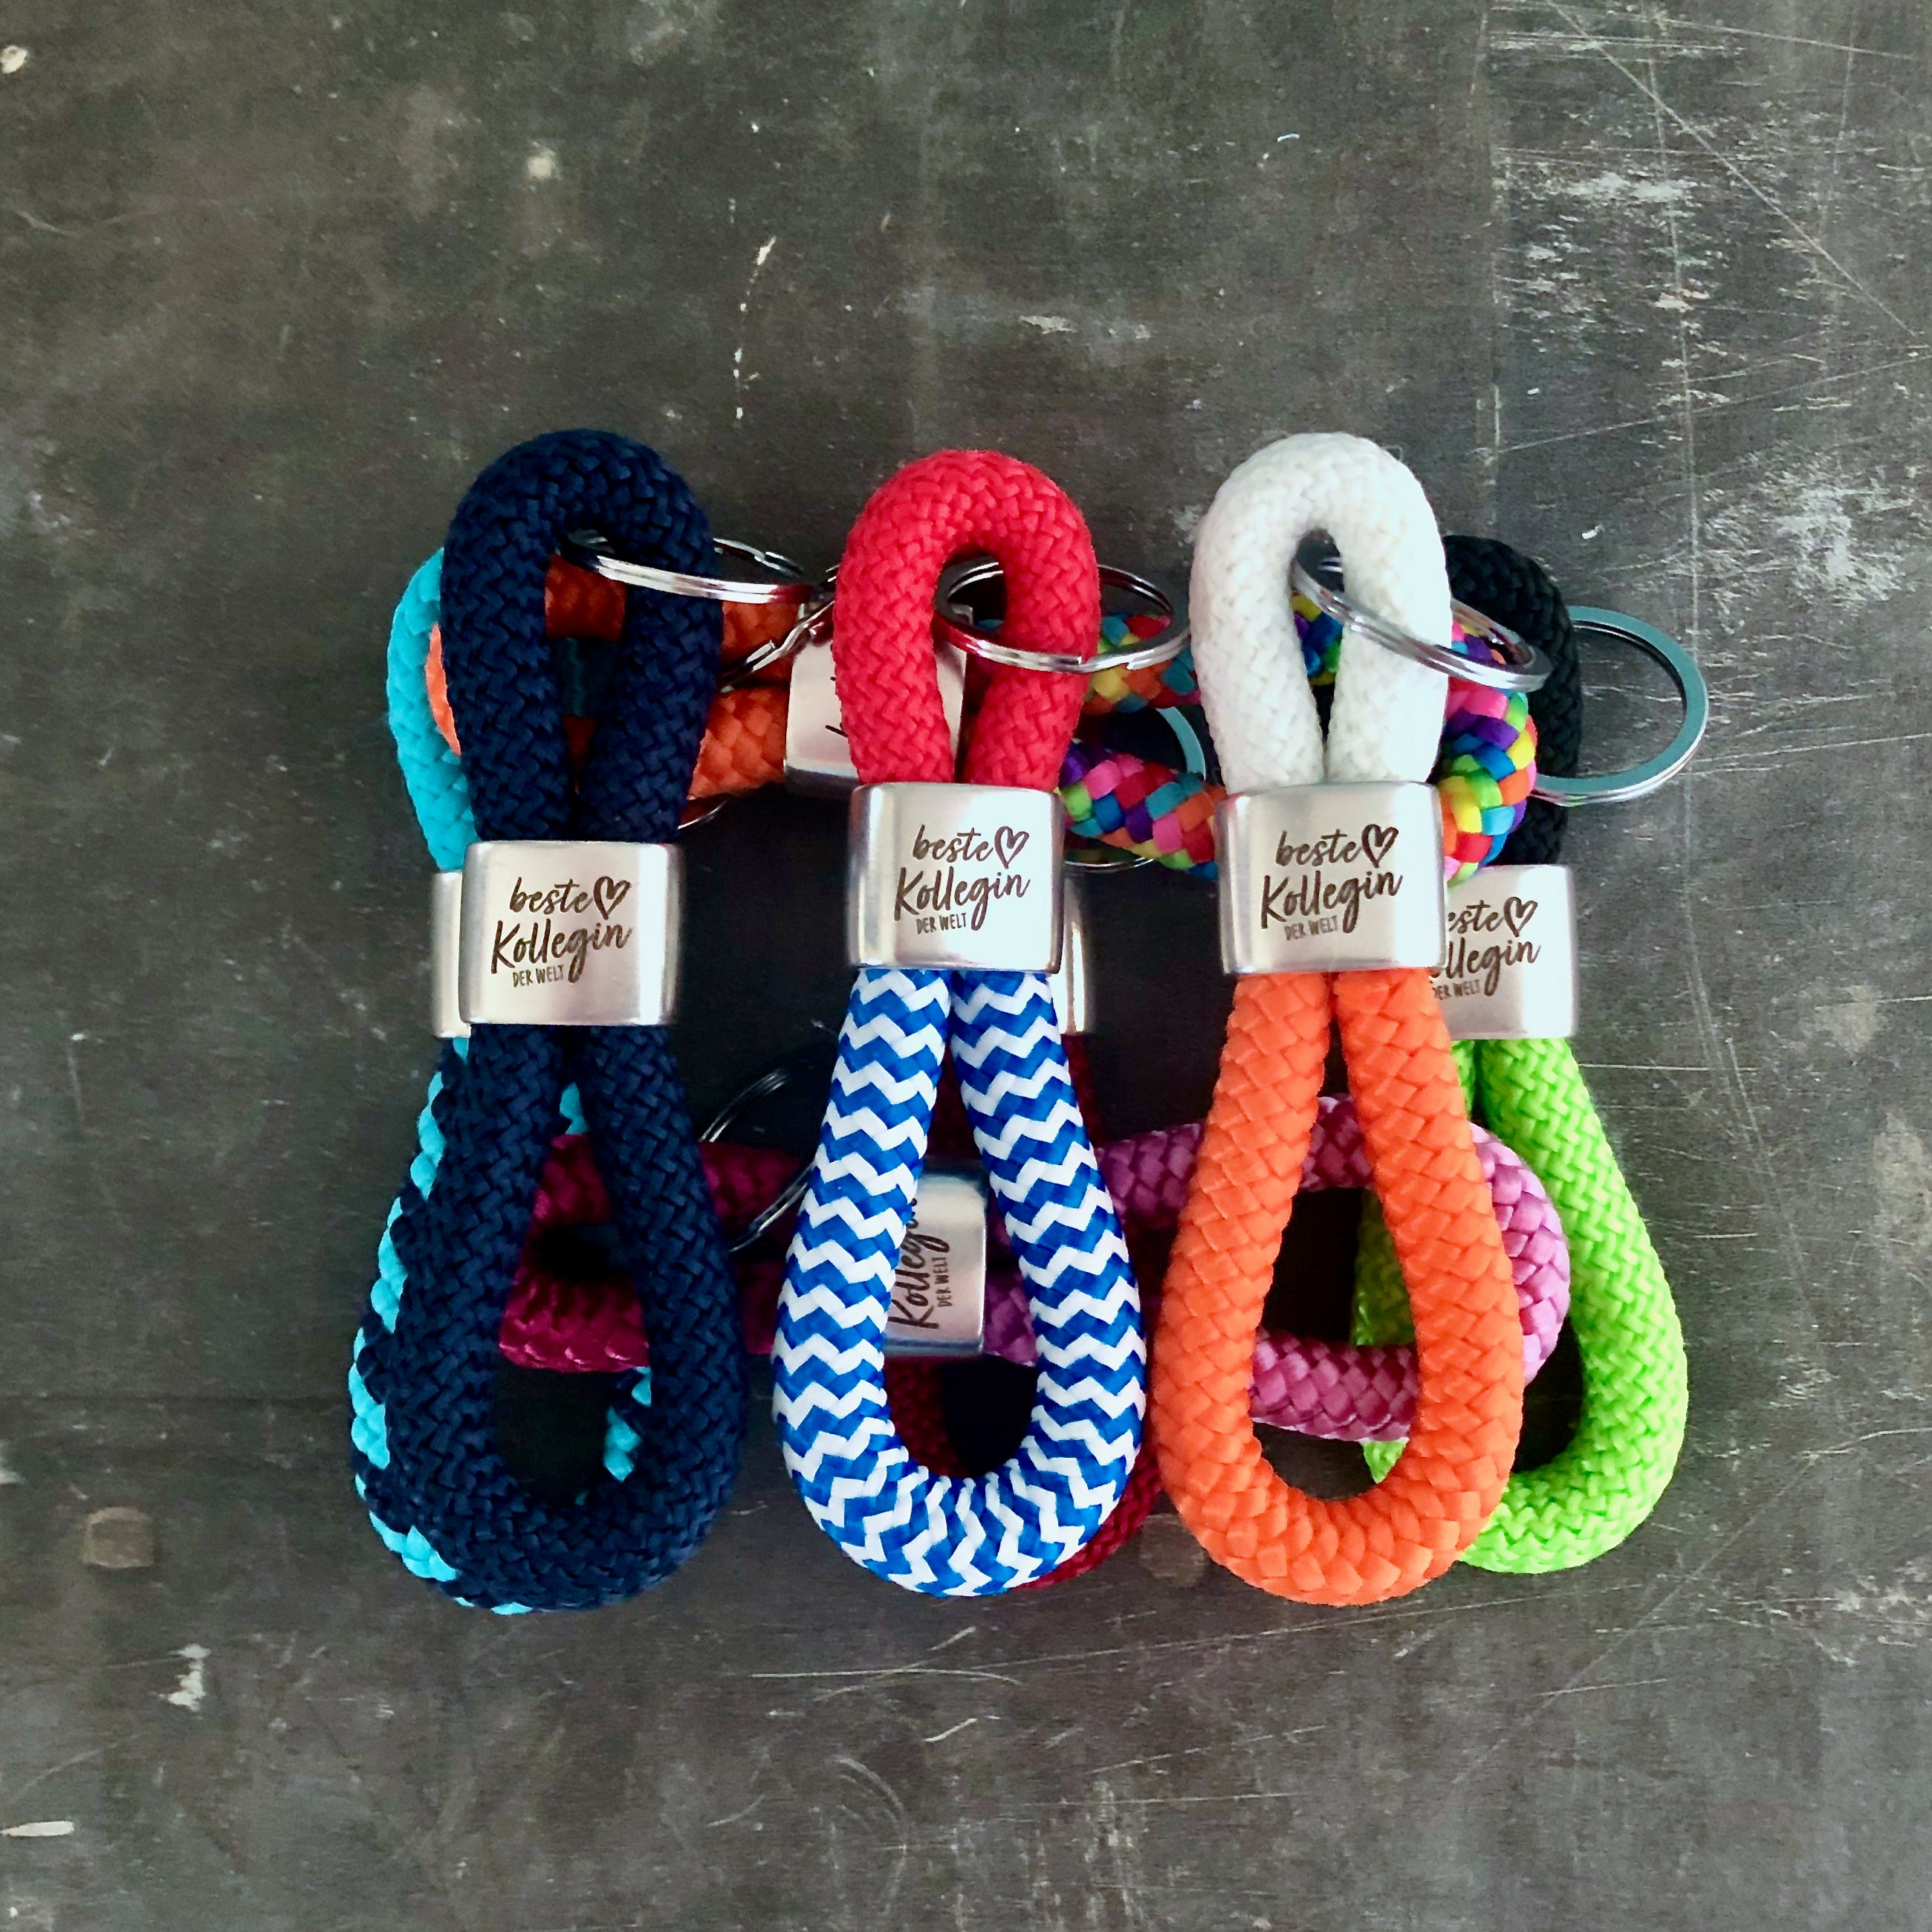 Key rings made of sail rope and silver colored key rings